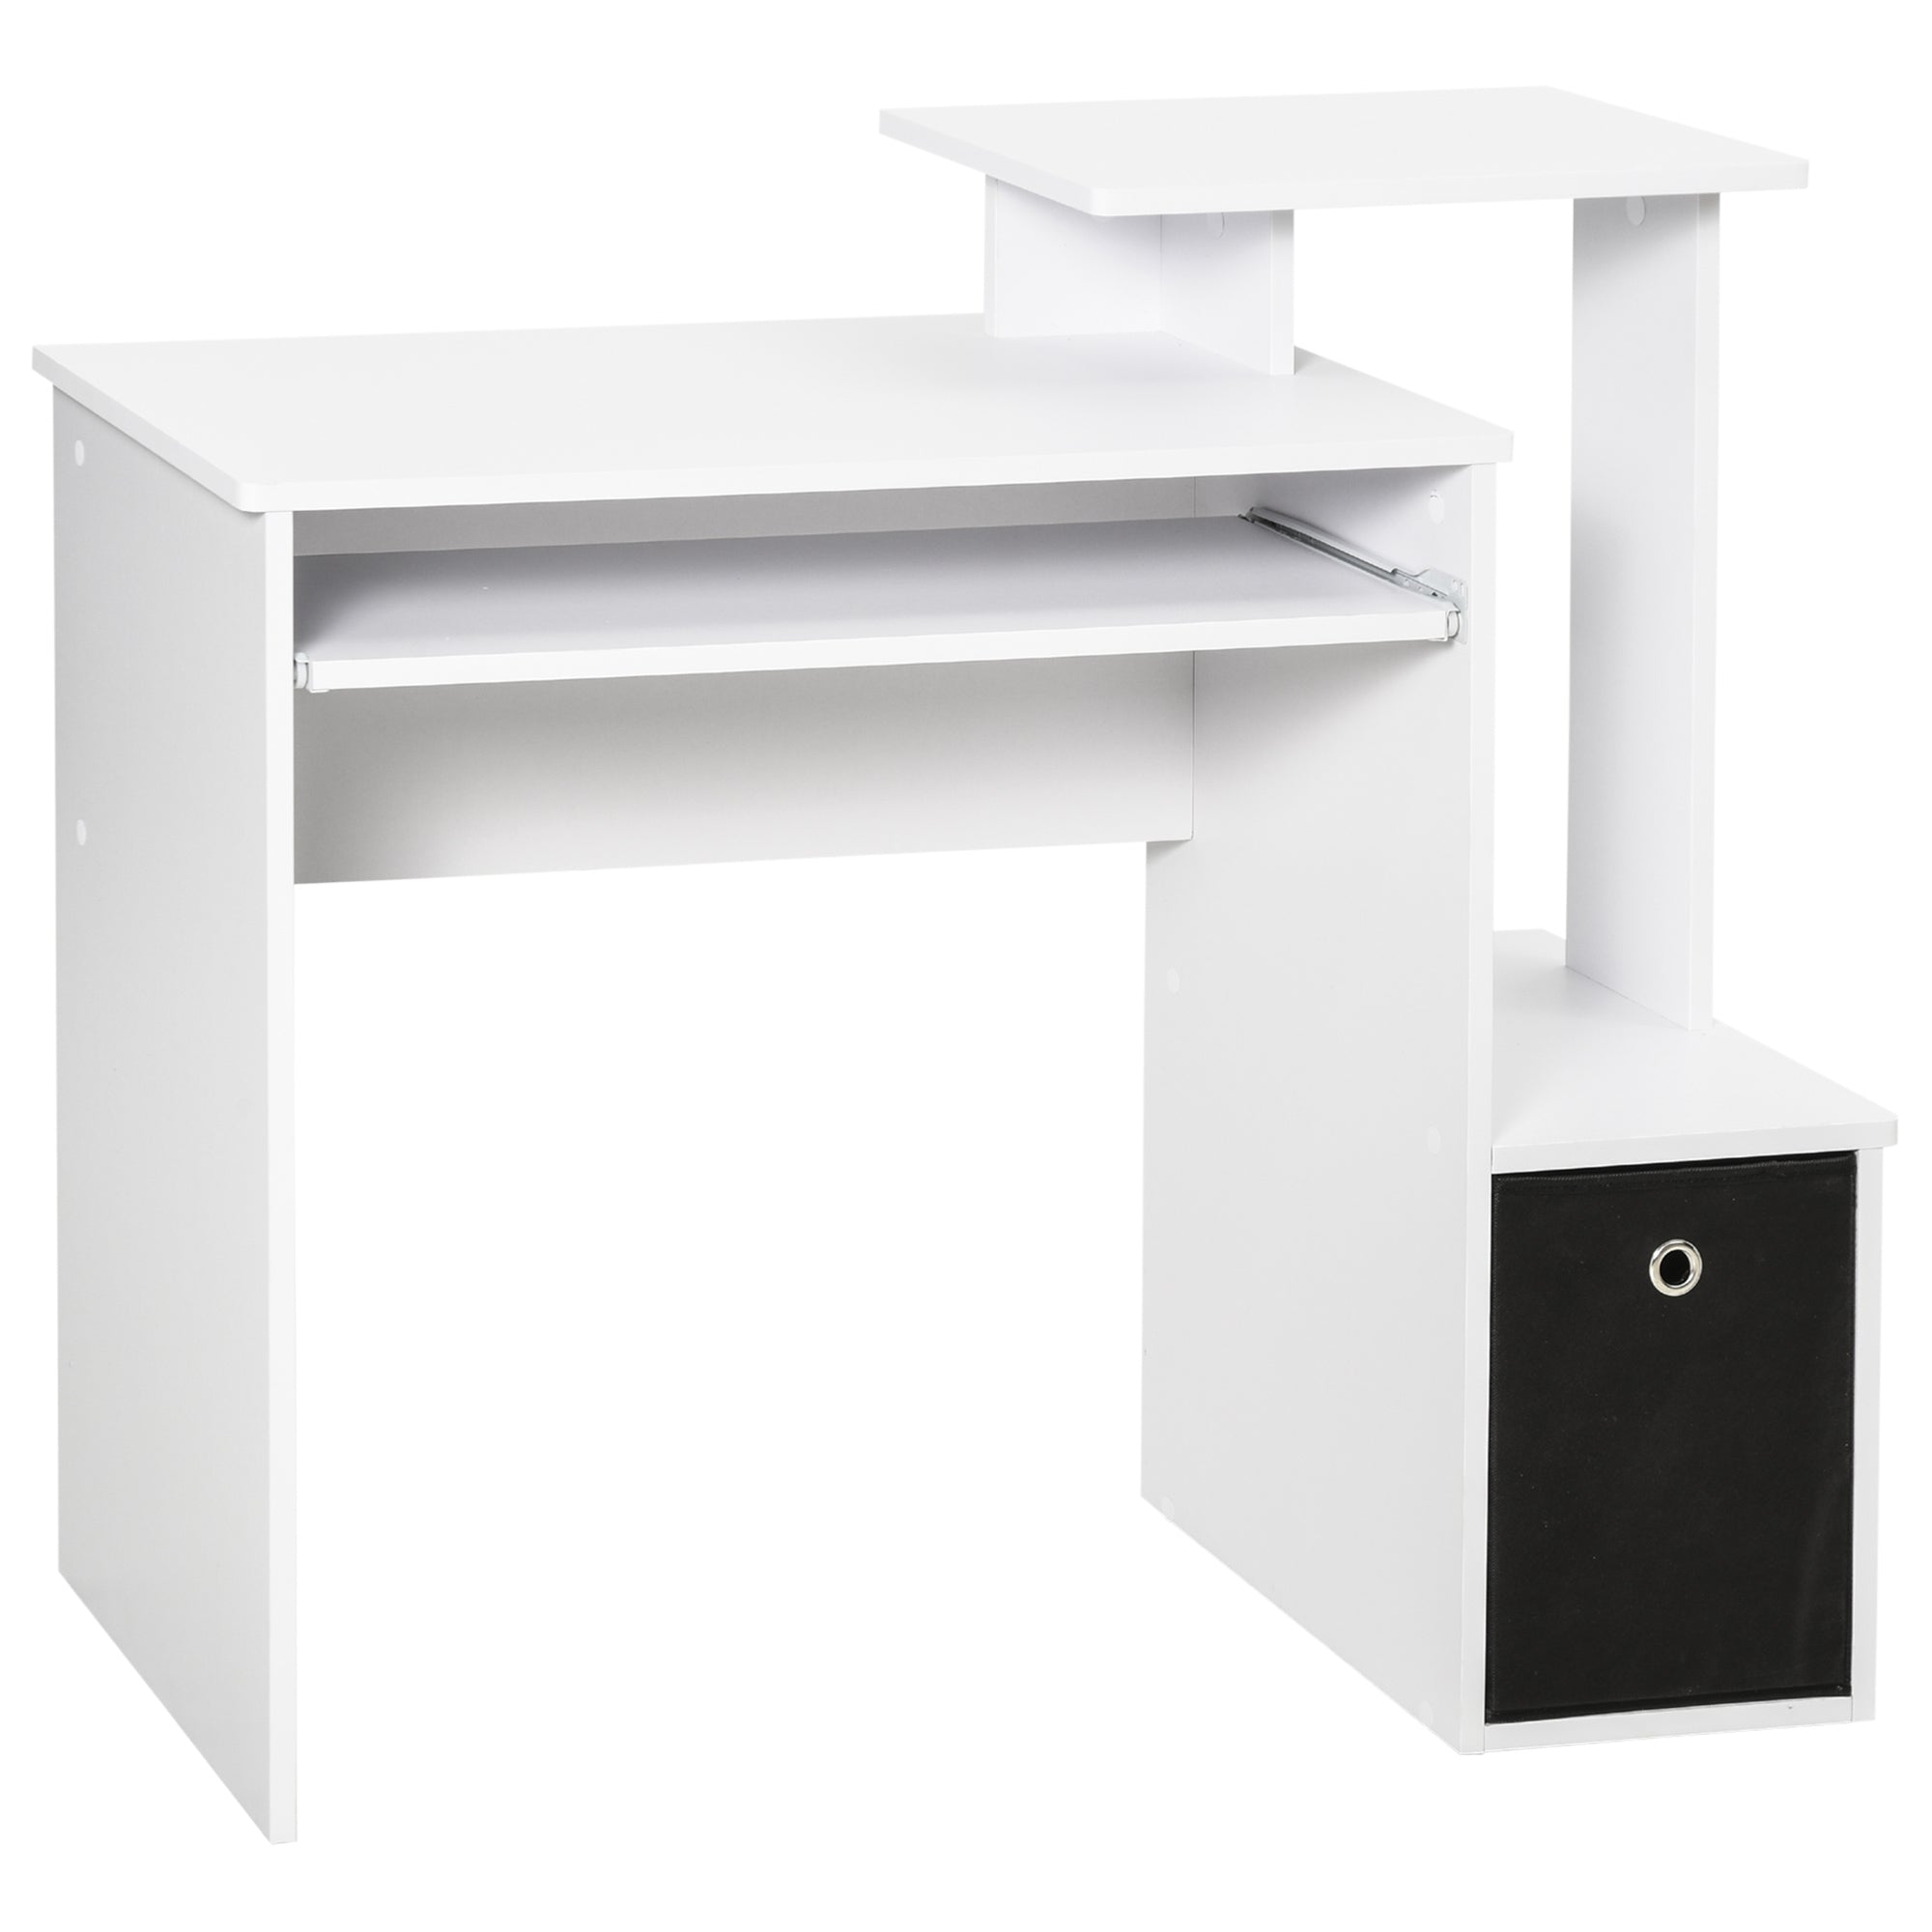 ProperAV Computer Desk with Sliding Keyboard Tray & Side Compartment (White)